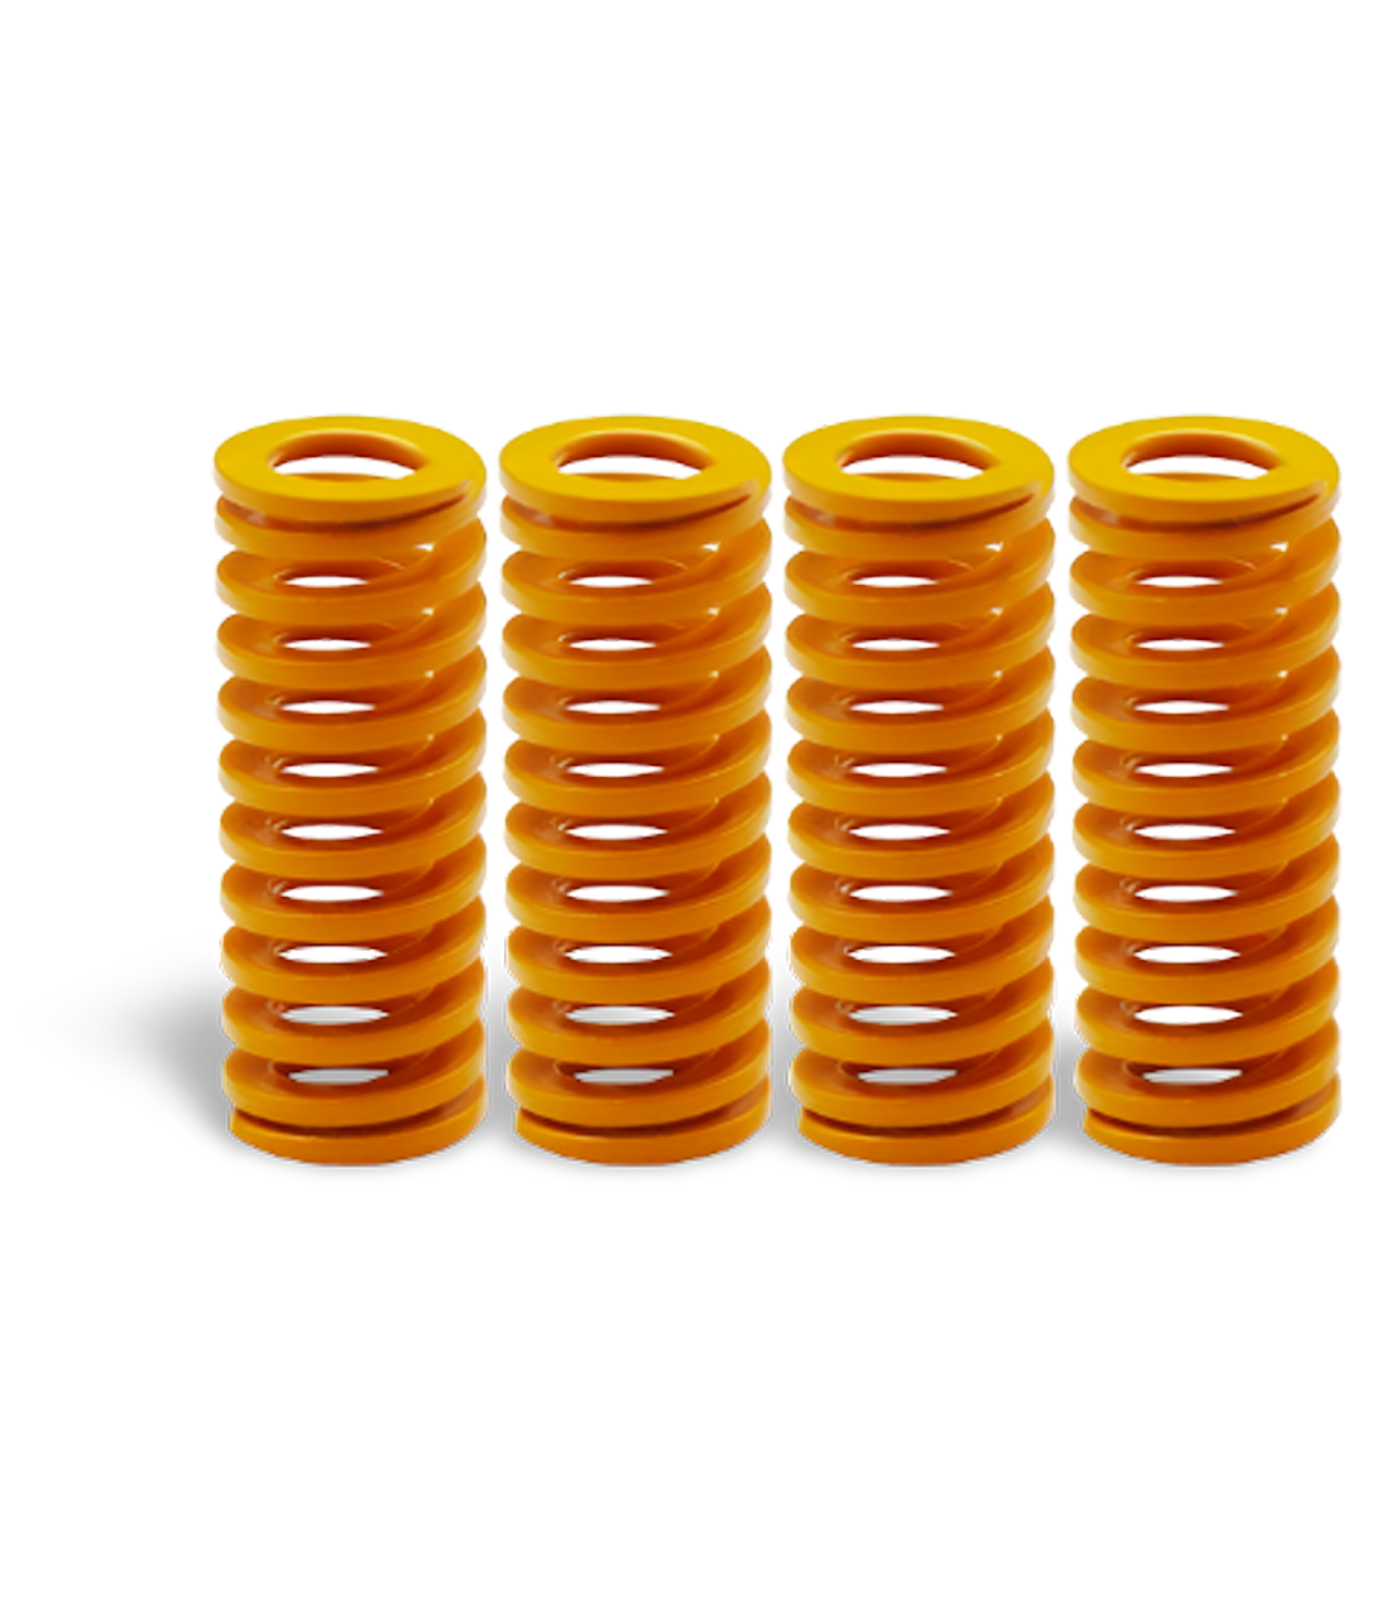 FDM 3D Printer Heated Bed Leveling Springs